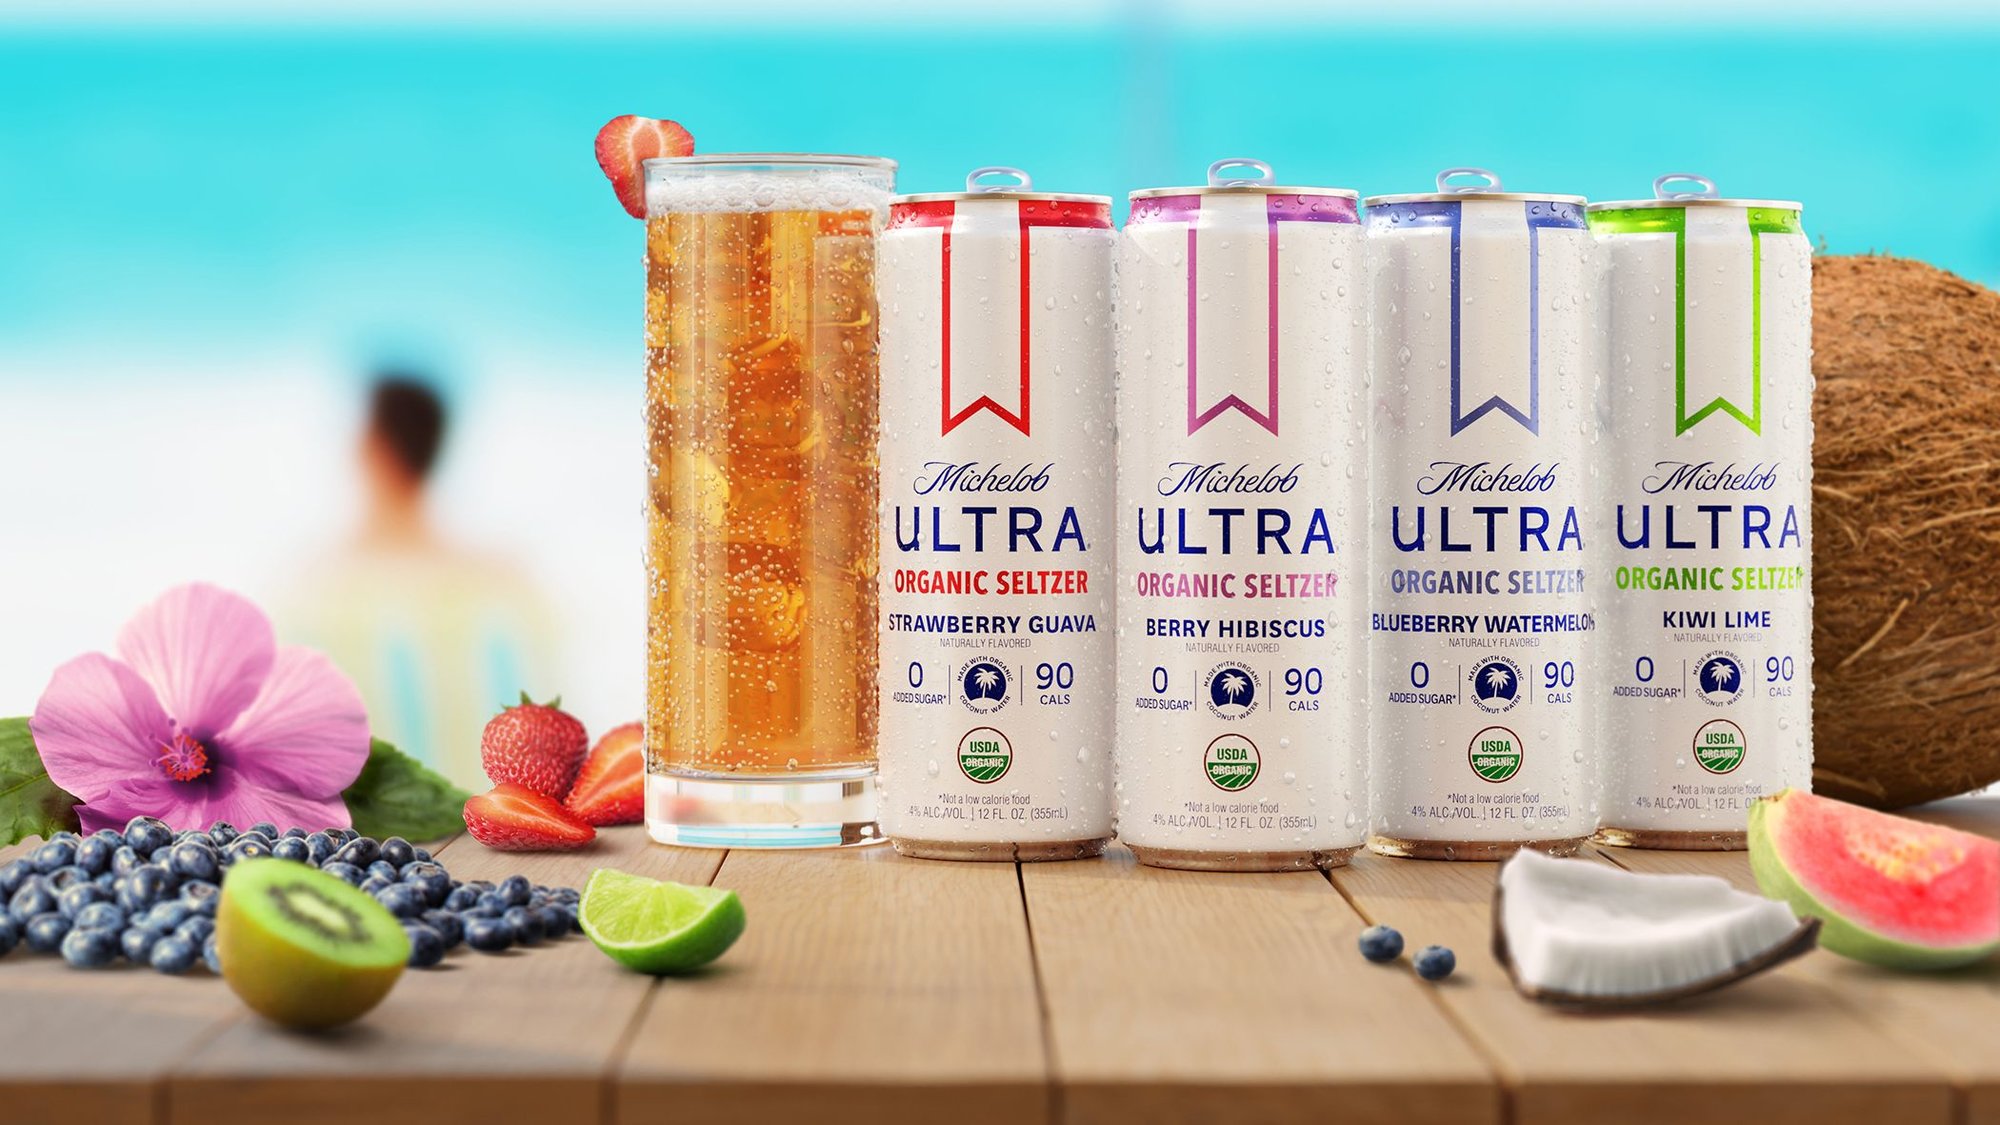 This is the main background for the Michelob Ultra Organic Seltzer Mango Apricot